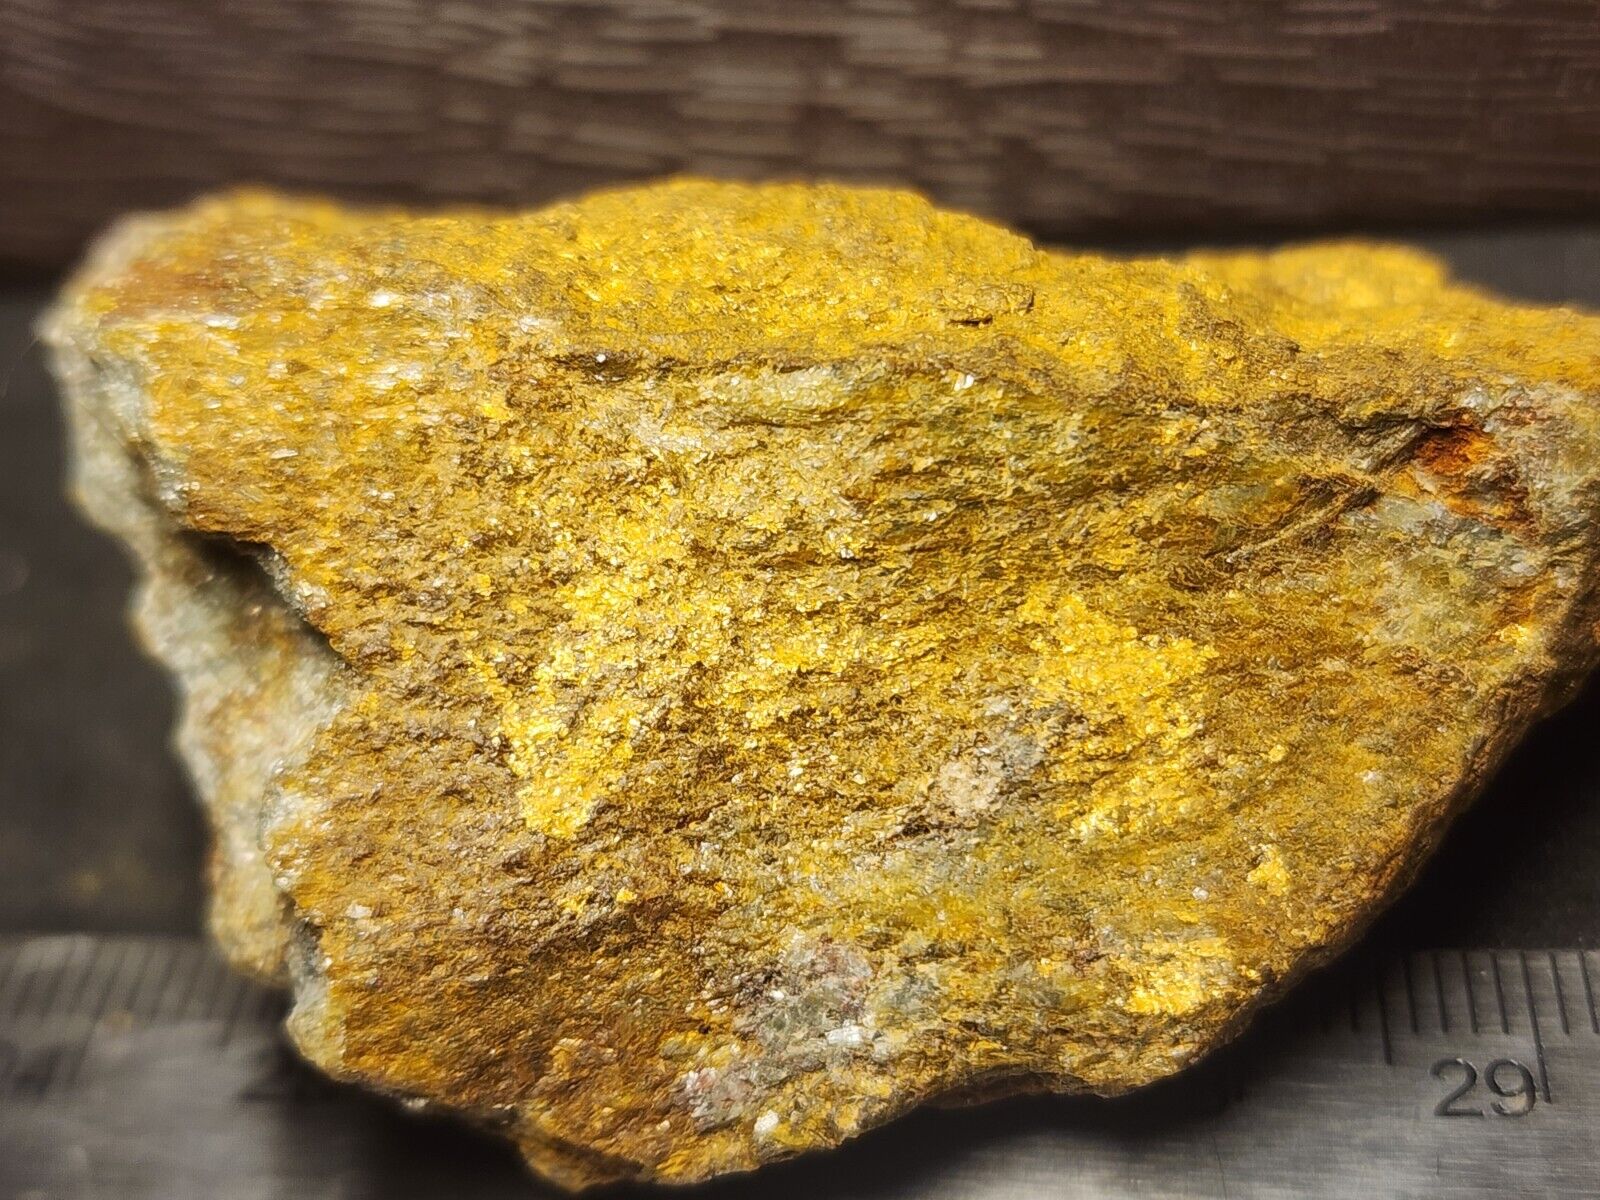 Gold Ore Sample 79.1g Lots Of Visible Gold - 1148 Rich